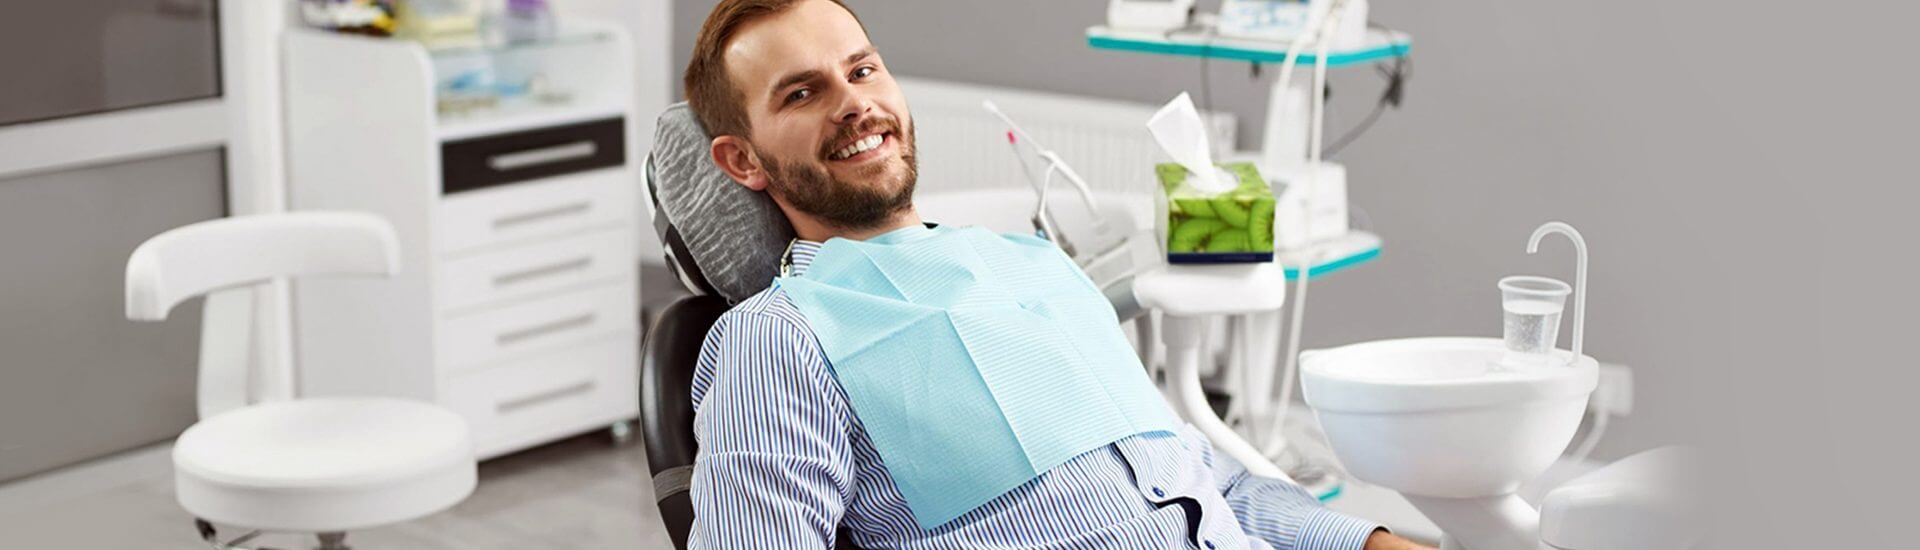 Providing Comprehensive Dental Care Is the Role of General Dentistry